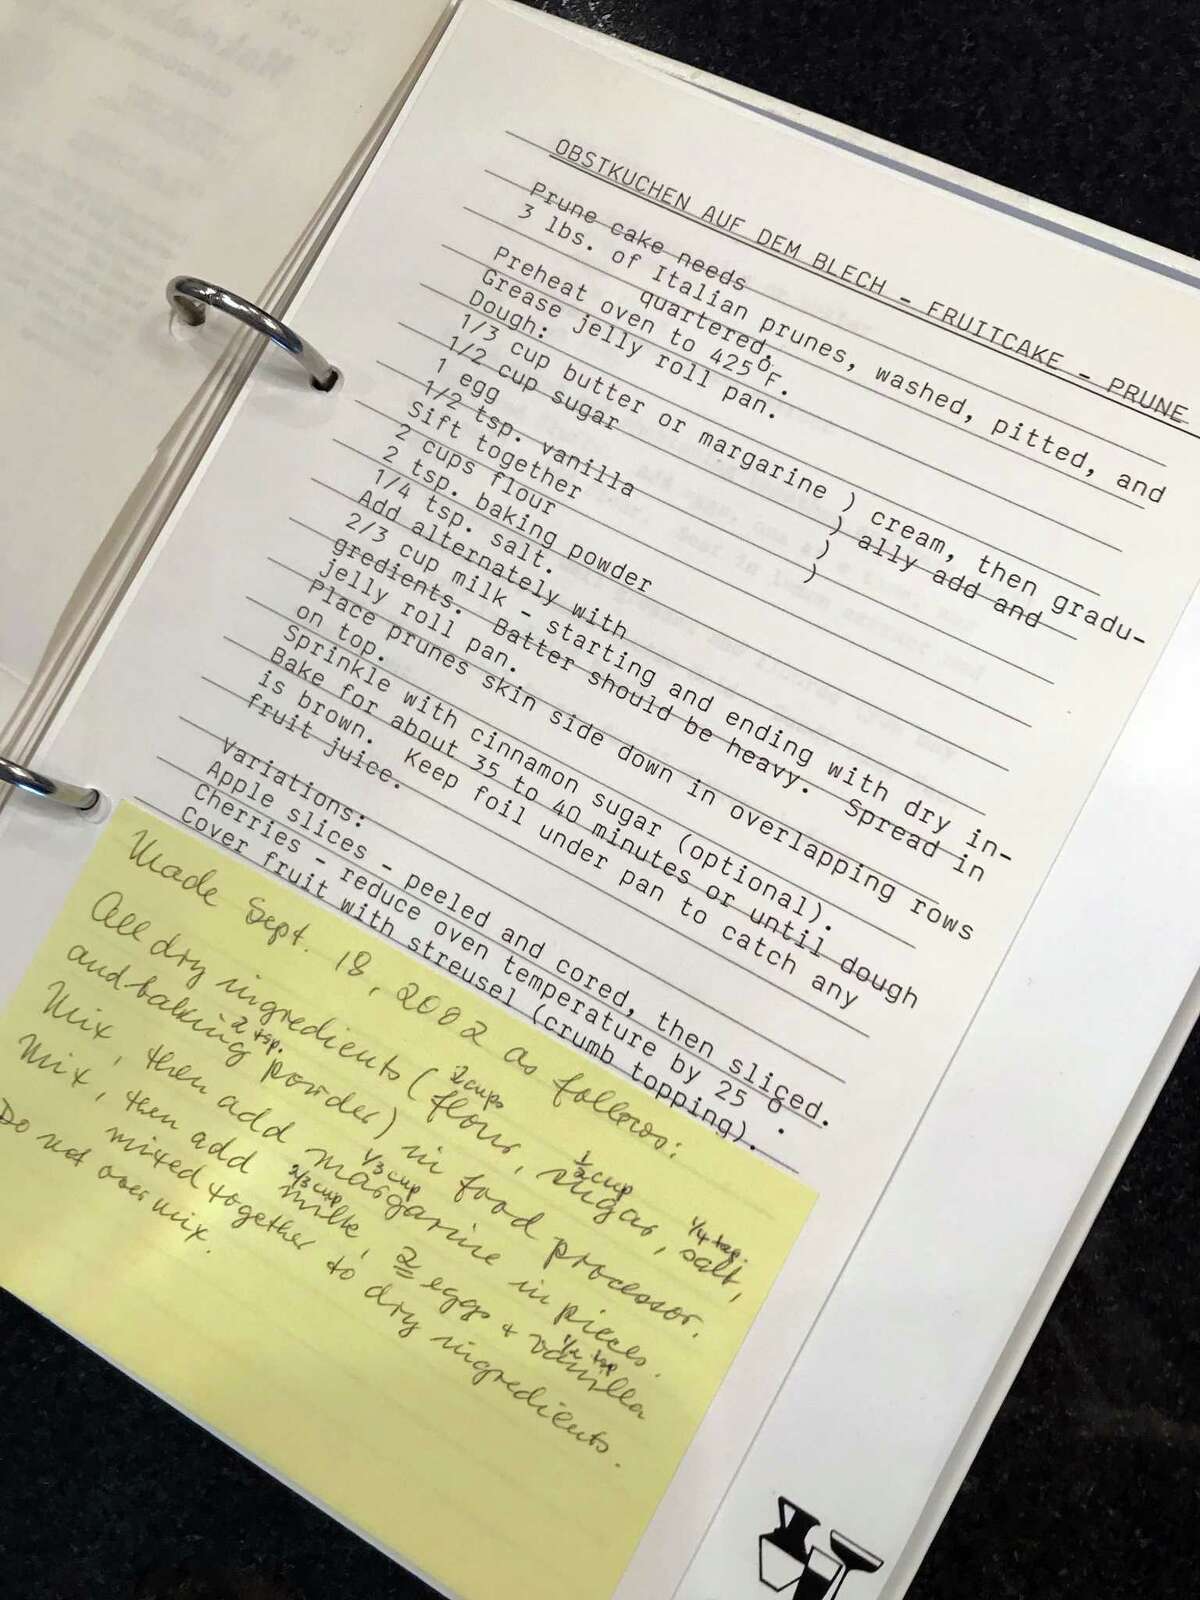 Michelle Barrera has collected about 100 of her mother's hand-typed recipes into a family cookbook.